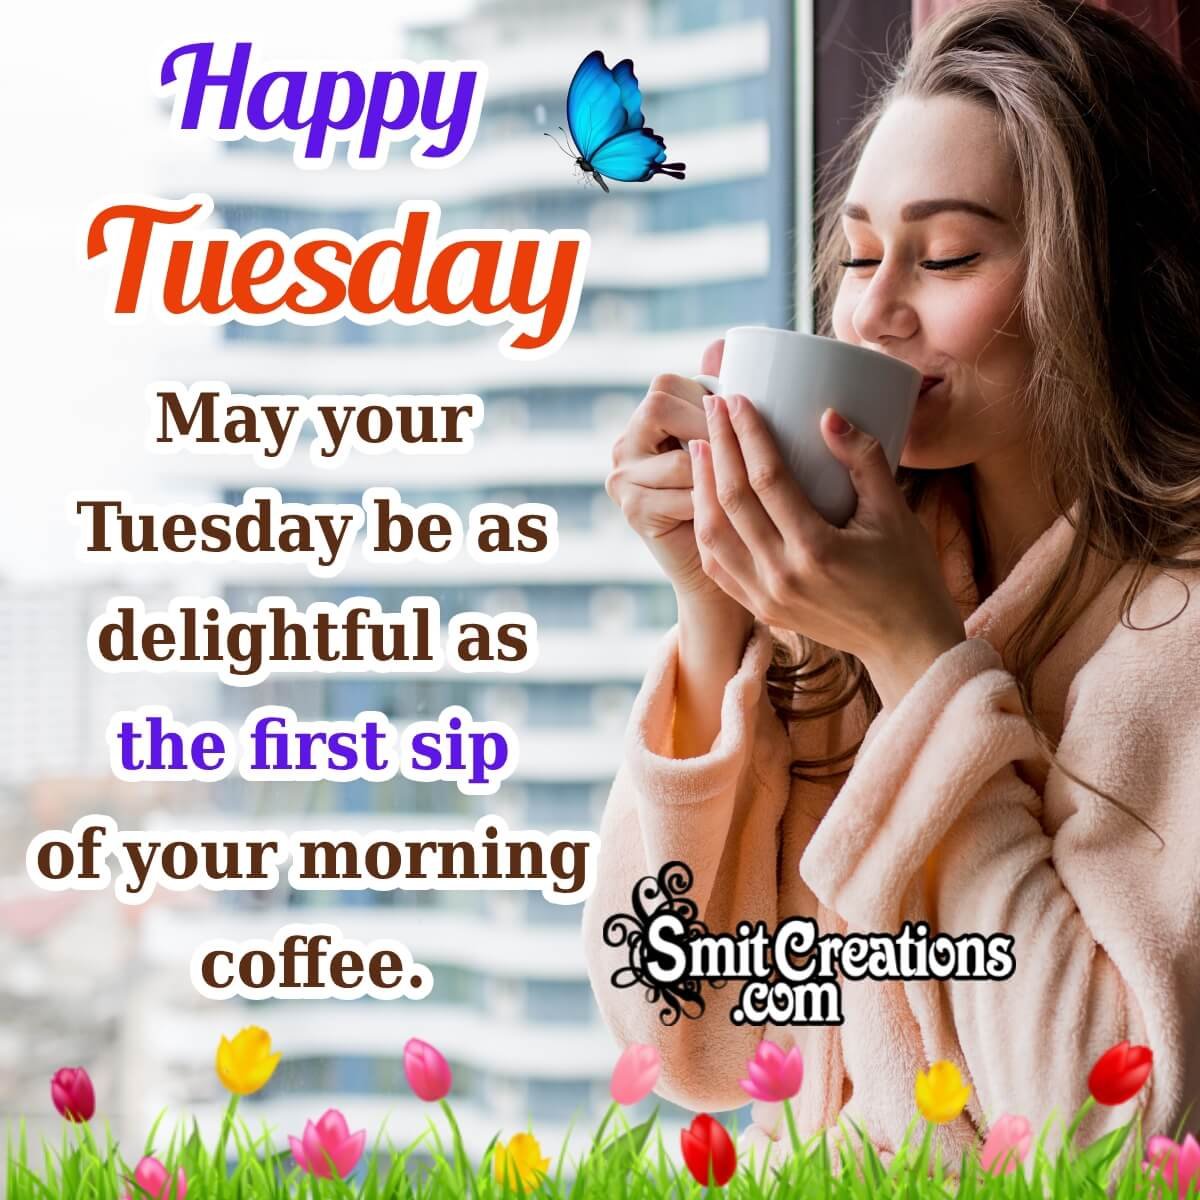 Happy Tuesday Wishes